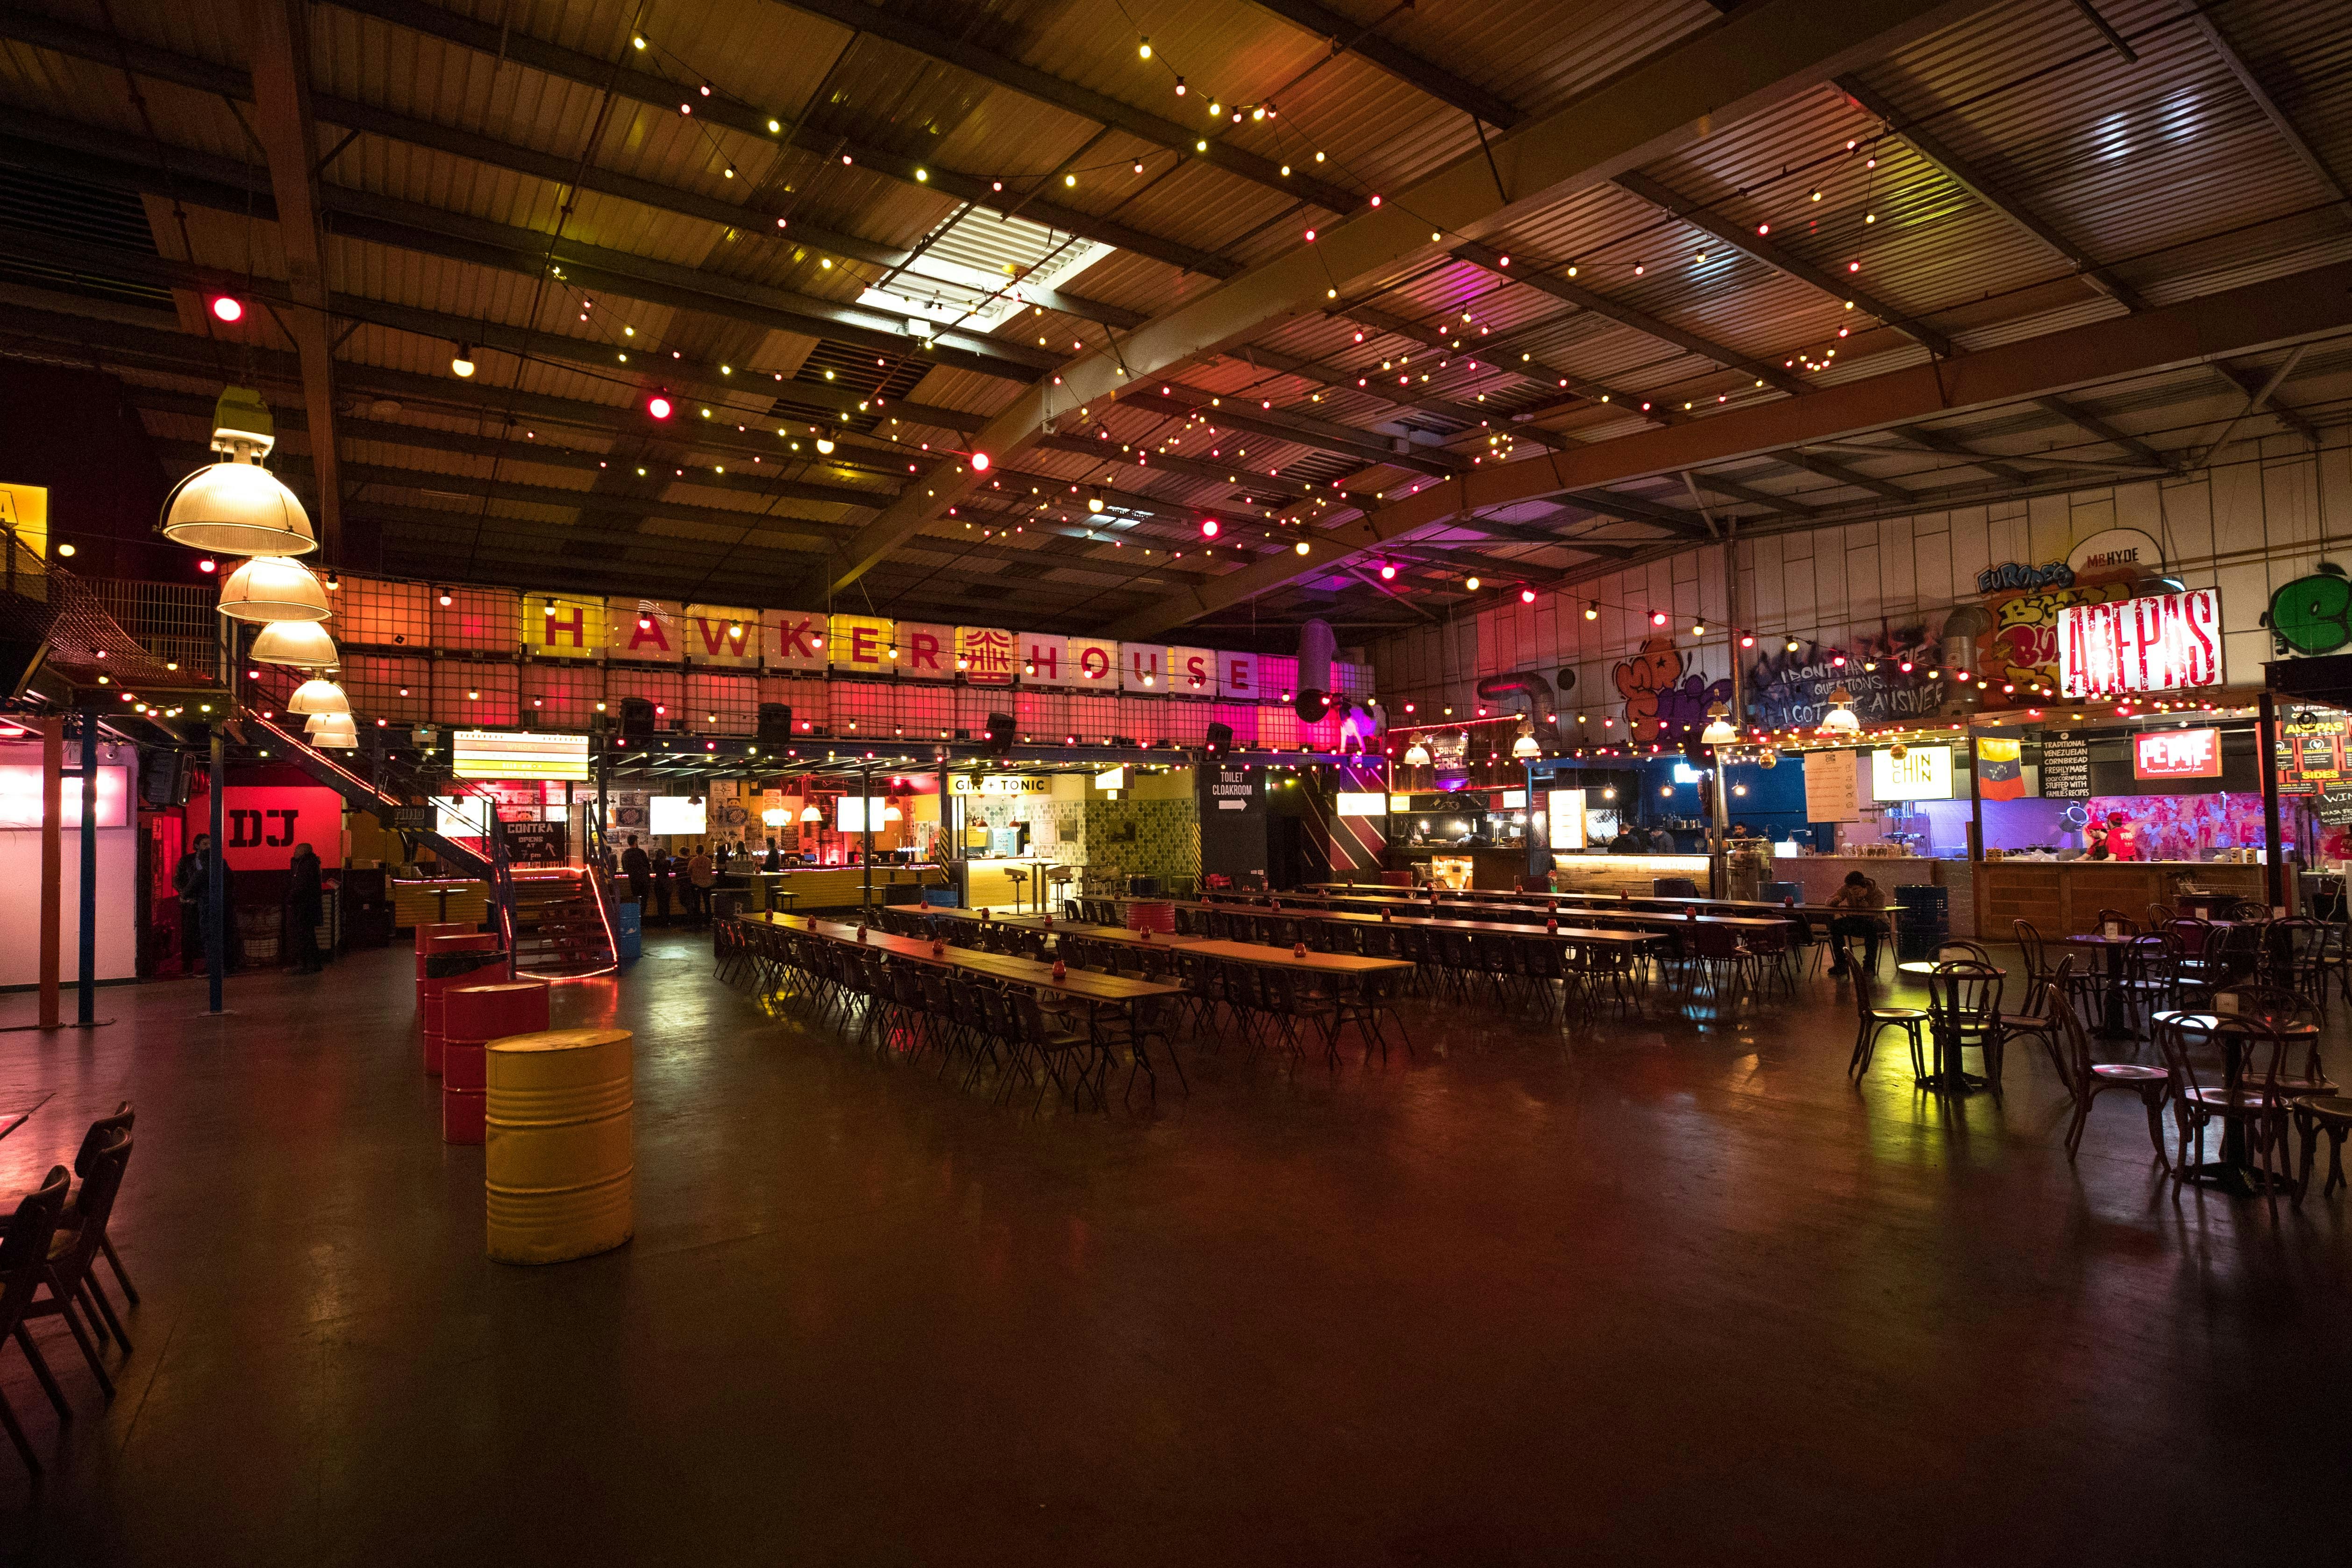 Large Party Venues in London - Hawker House